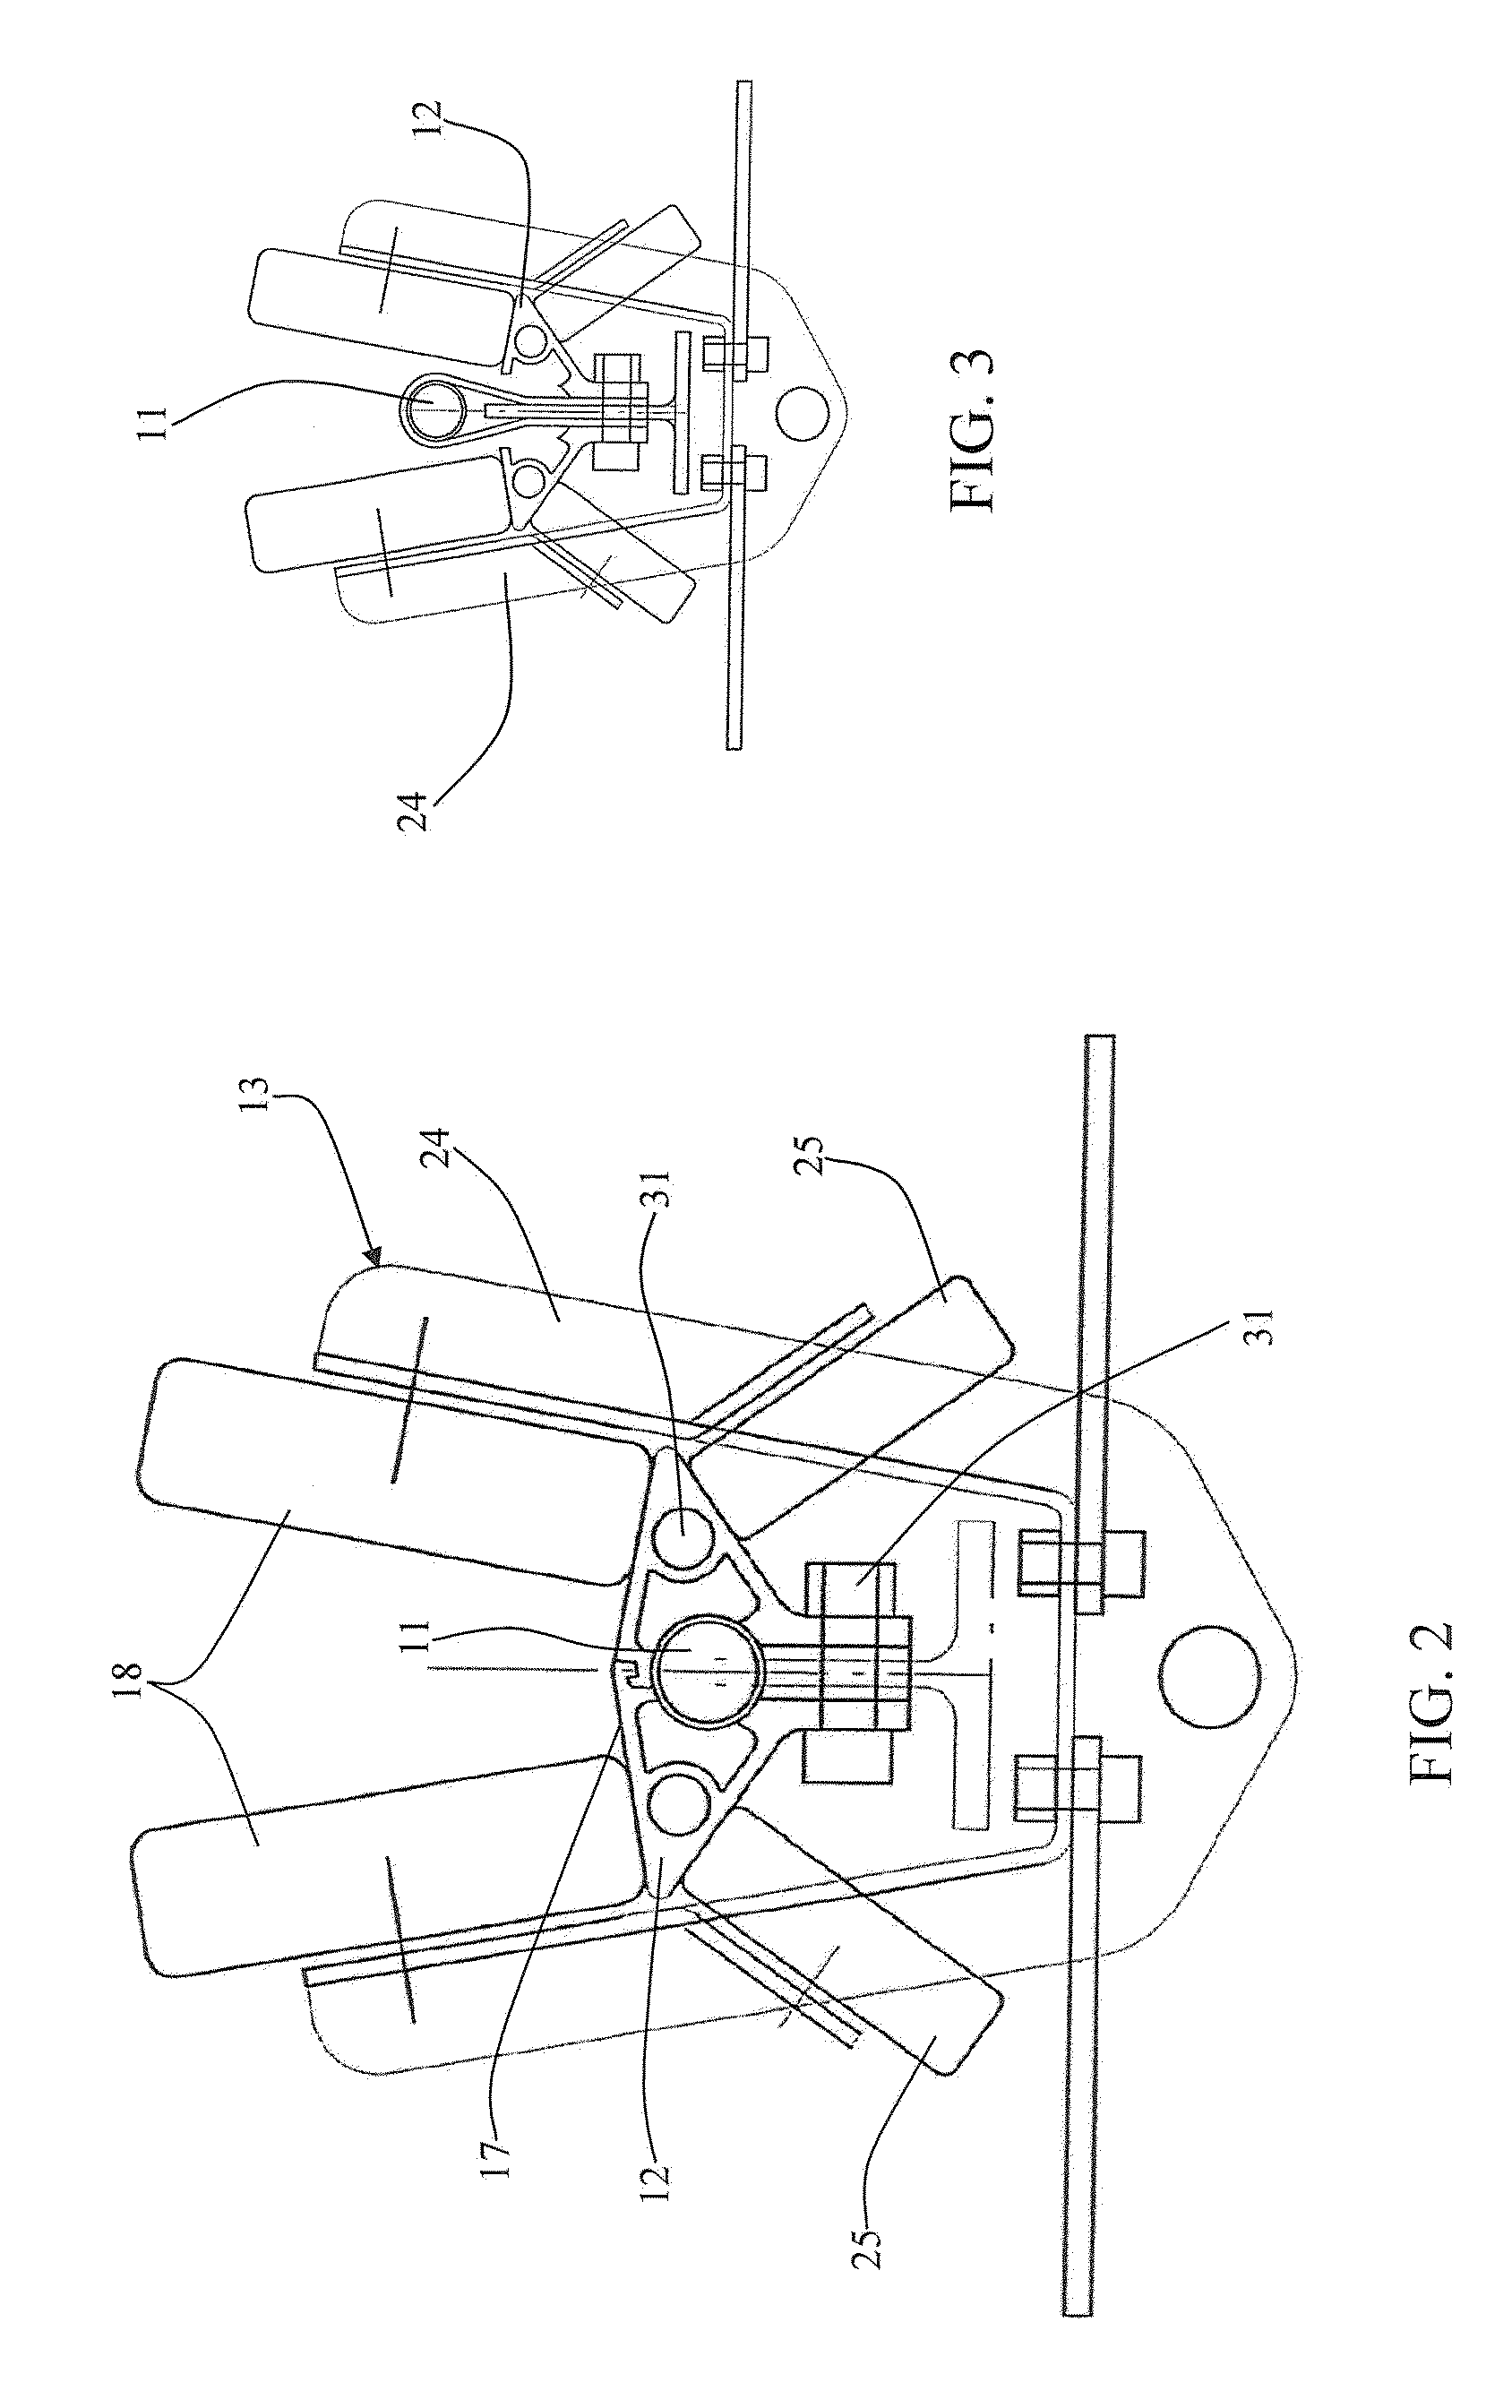 Device for suspending and moving an object or person